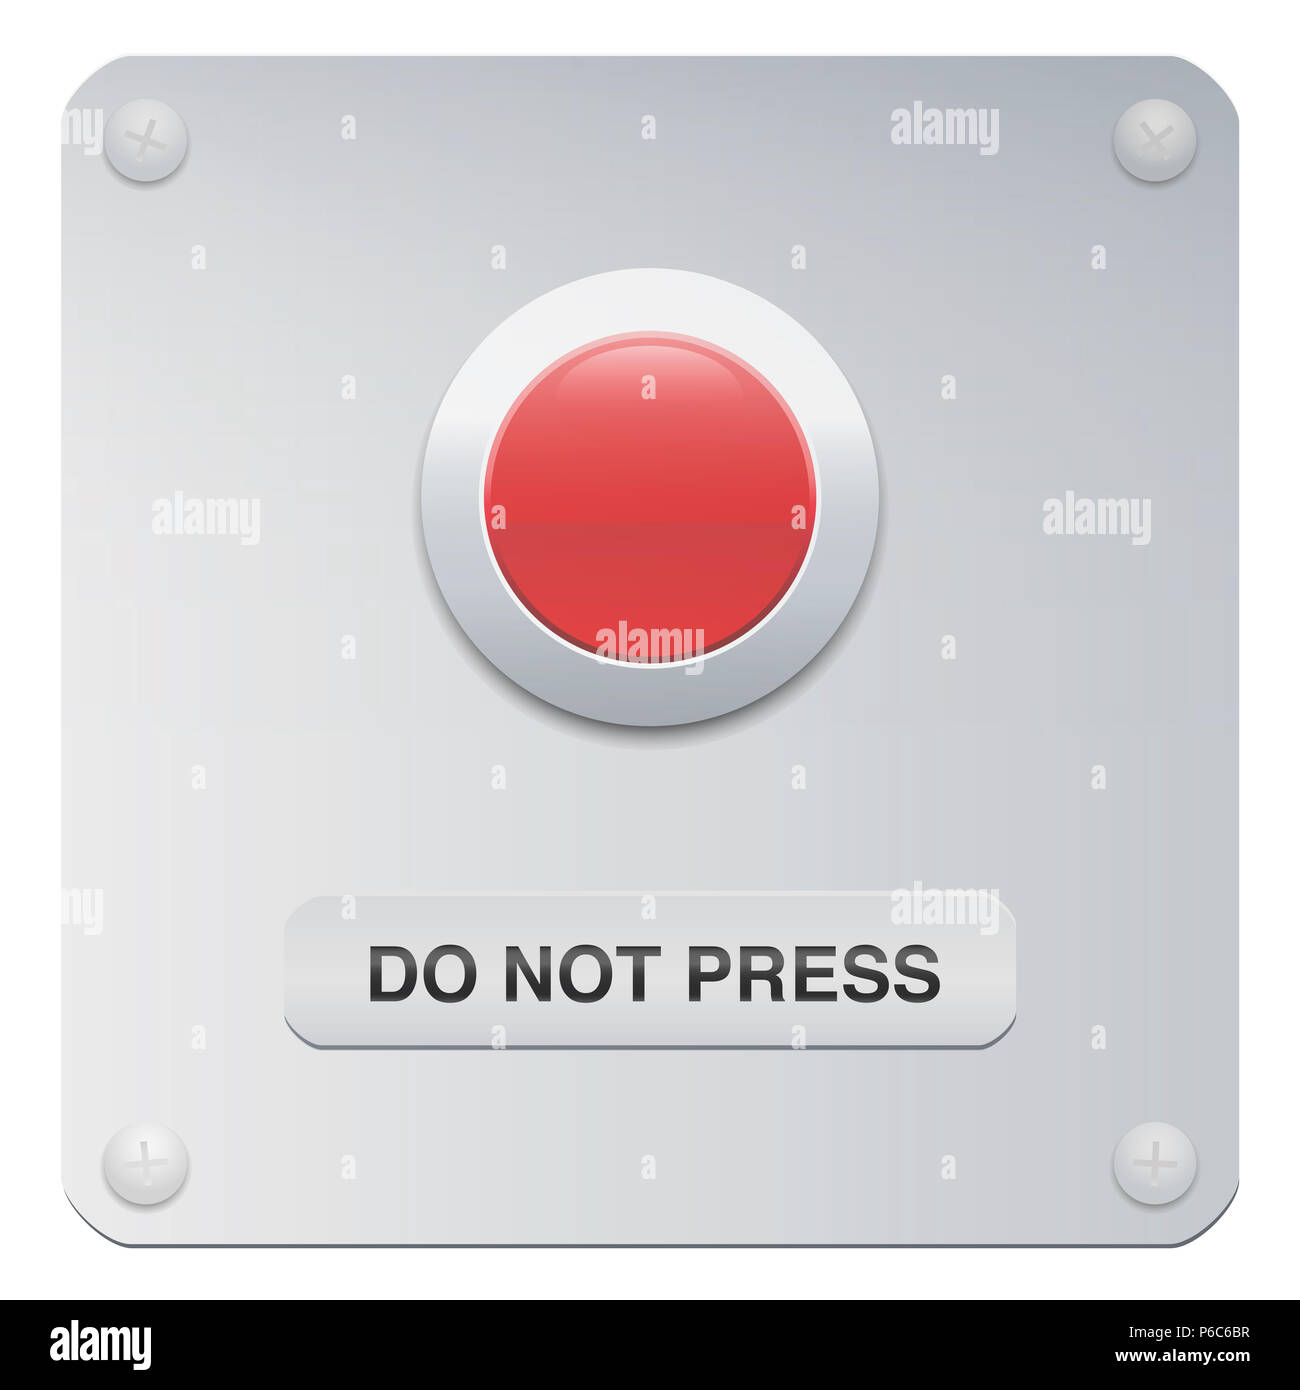 Do not press. Don't push the red button. Symbol for restraint, patience, withstand, composure or resistance. Stock Photo